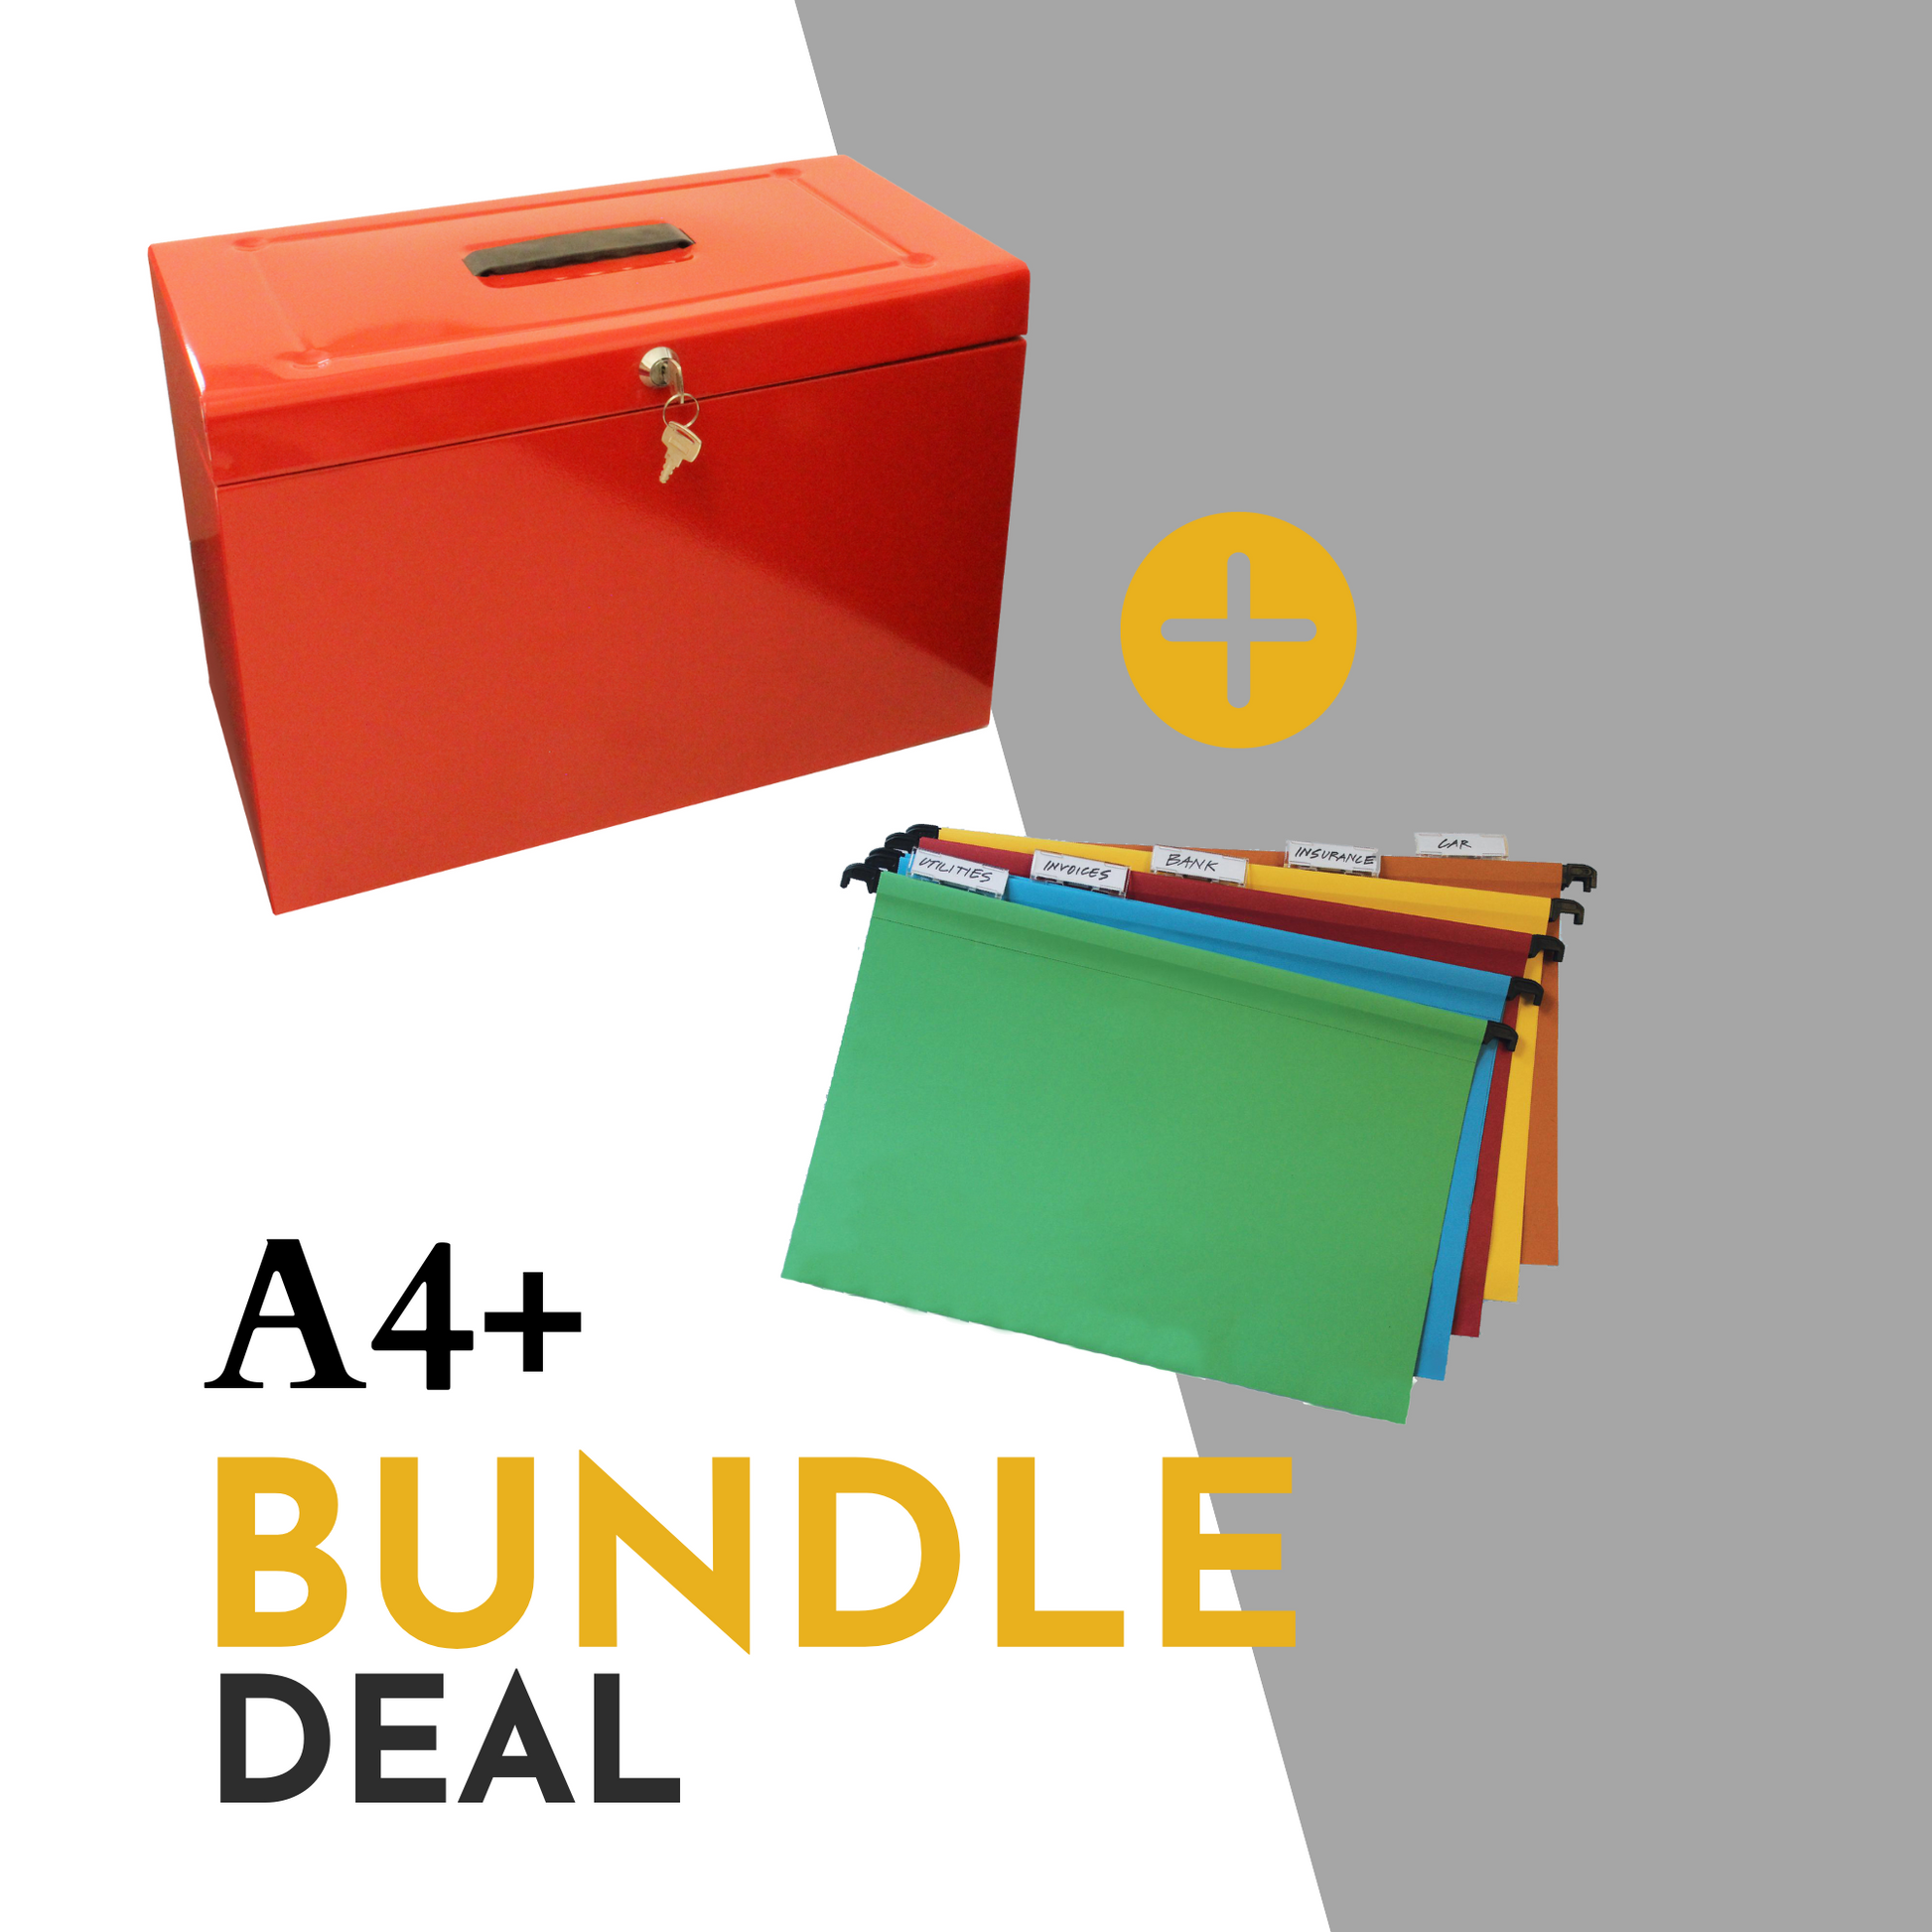 Promotional image for an A4+ (Foolscap Sized) file storage bundle deal, including a red file box with a handle and key lock, plus an additional set of 10 assorted colour Foolscap suspension files with index tabs, showcasing an organized filing solution.